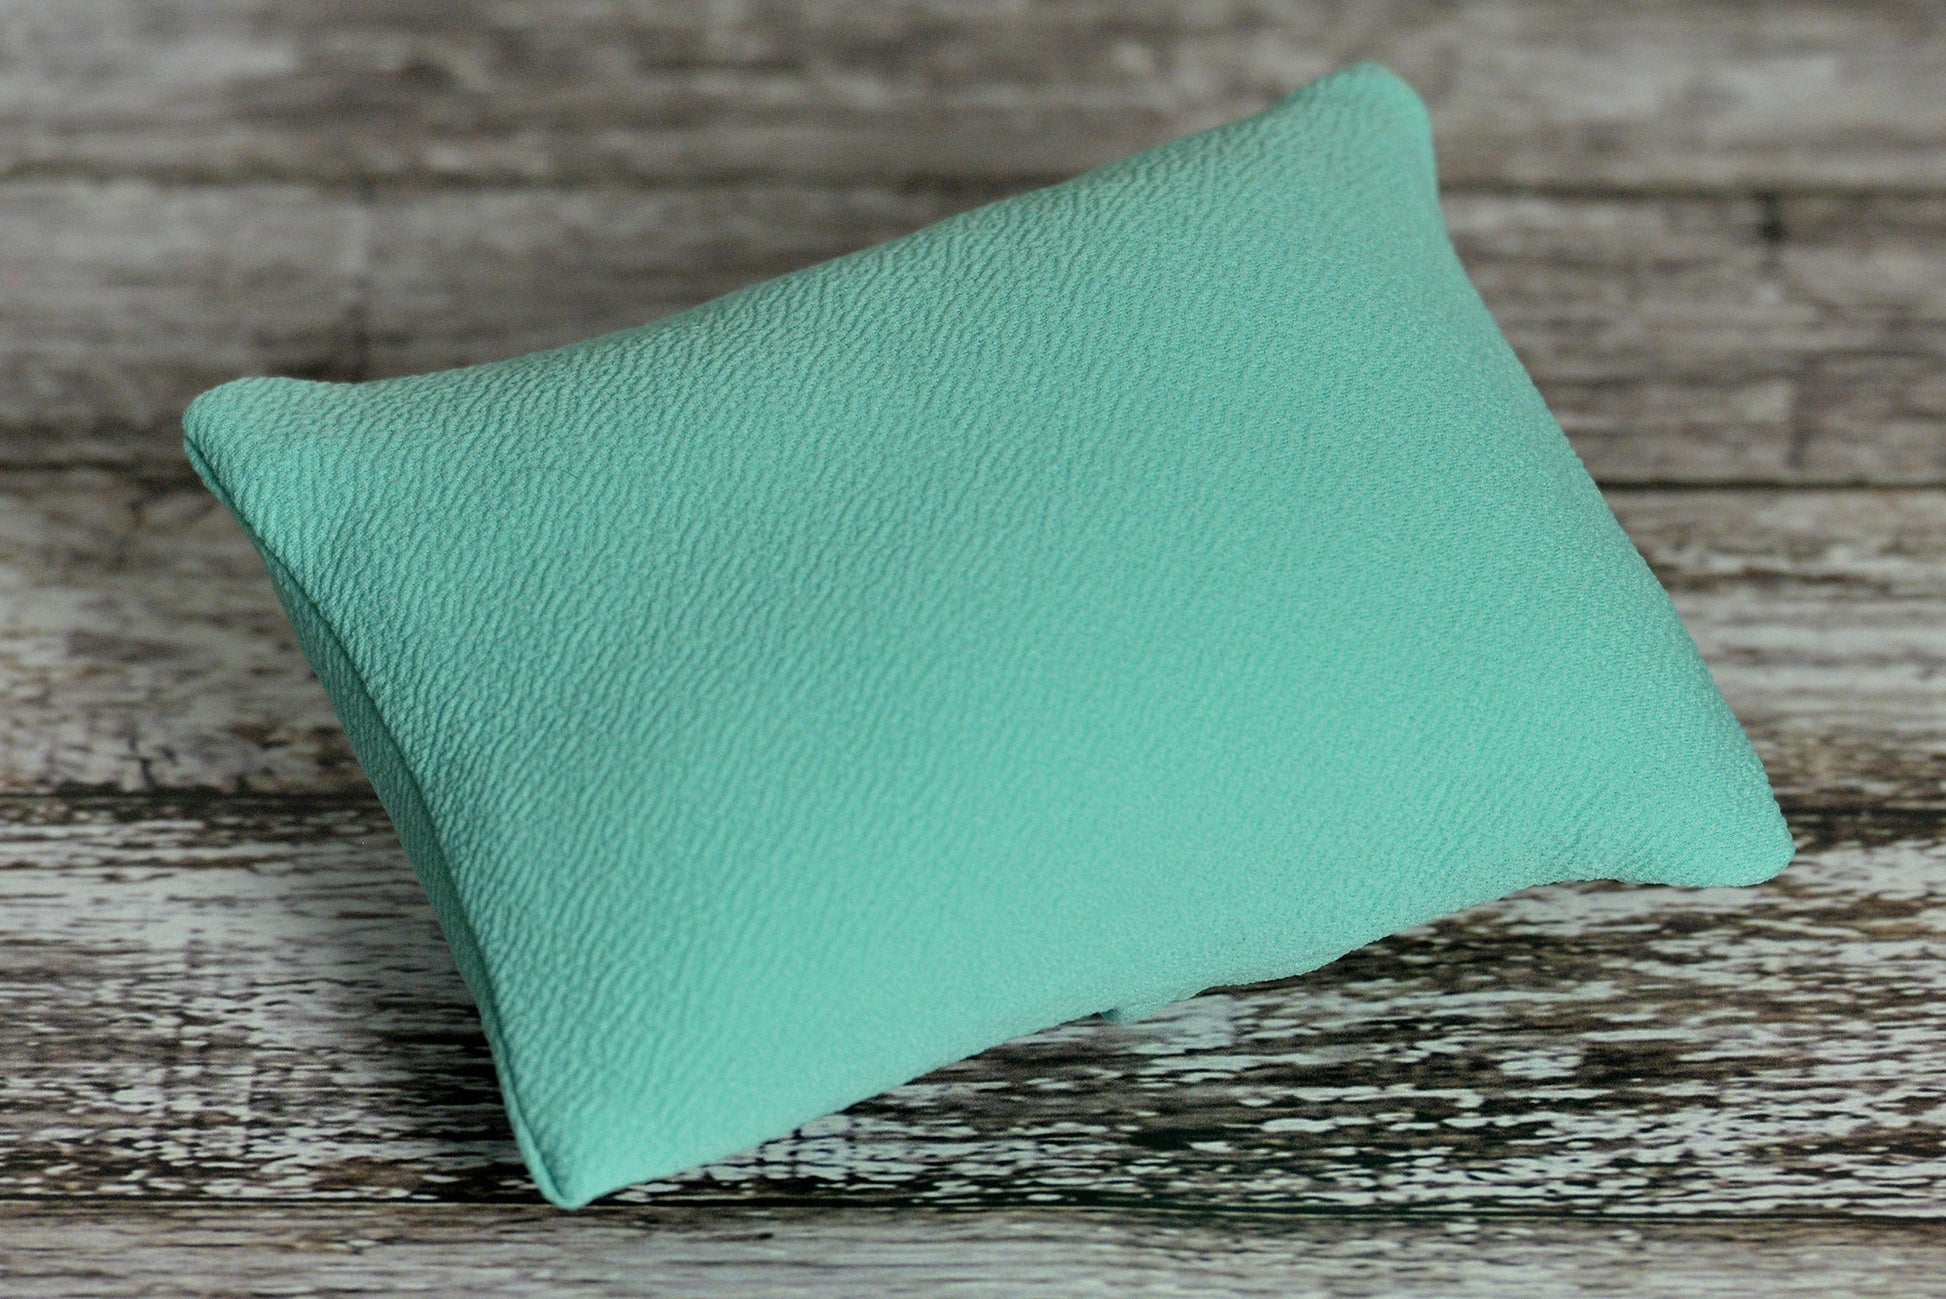 Matching Mini Pillow with Cover AND Bean Bag Fabric - Textured - Mint-Newborn Photography Props